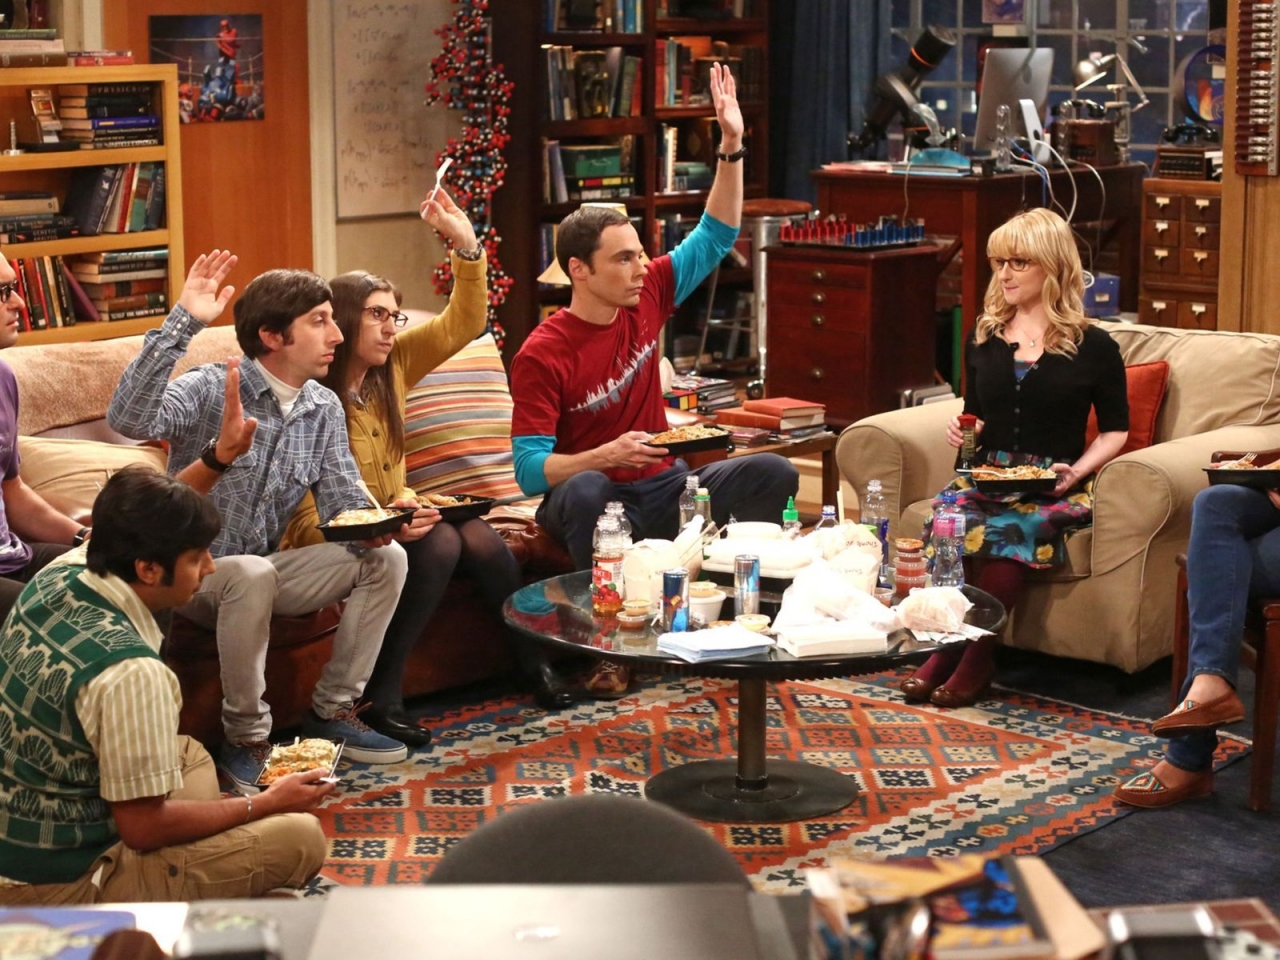 The Big Bang Theory Scene for 1280 x 960 resolution